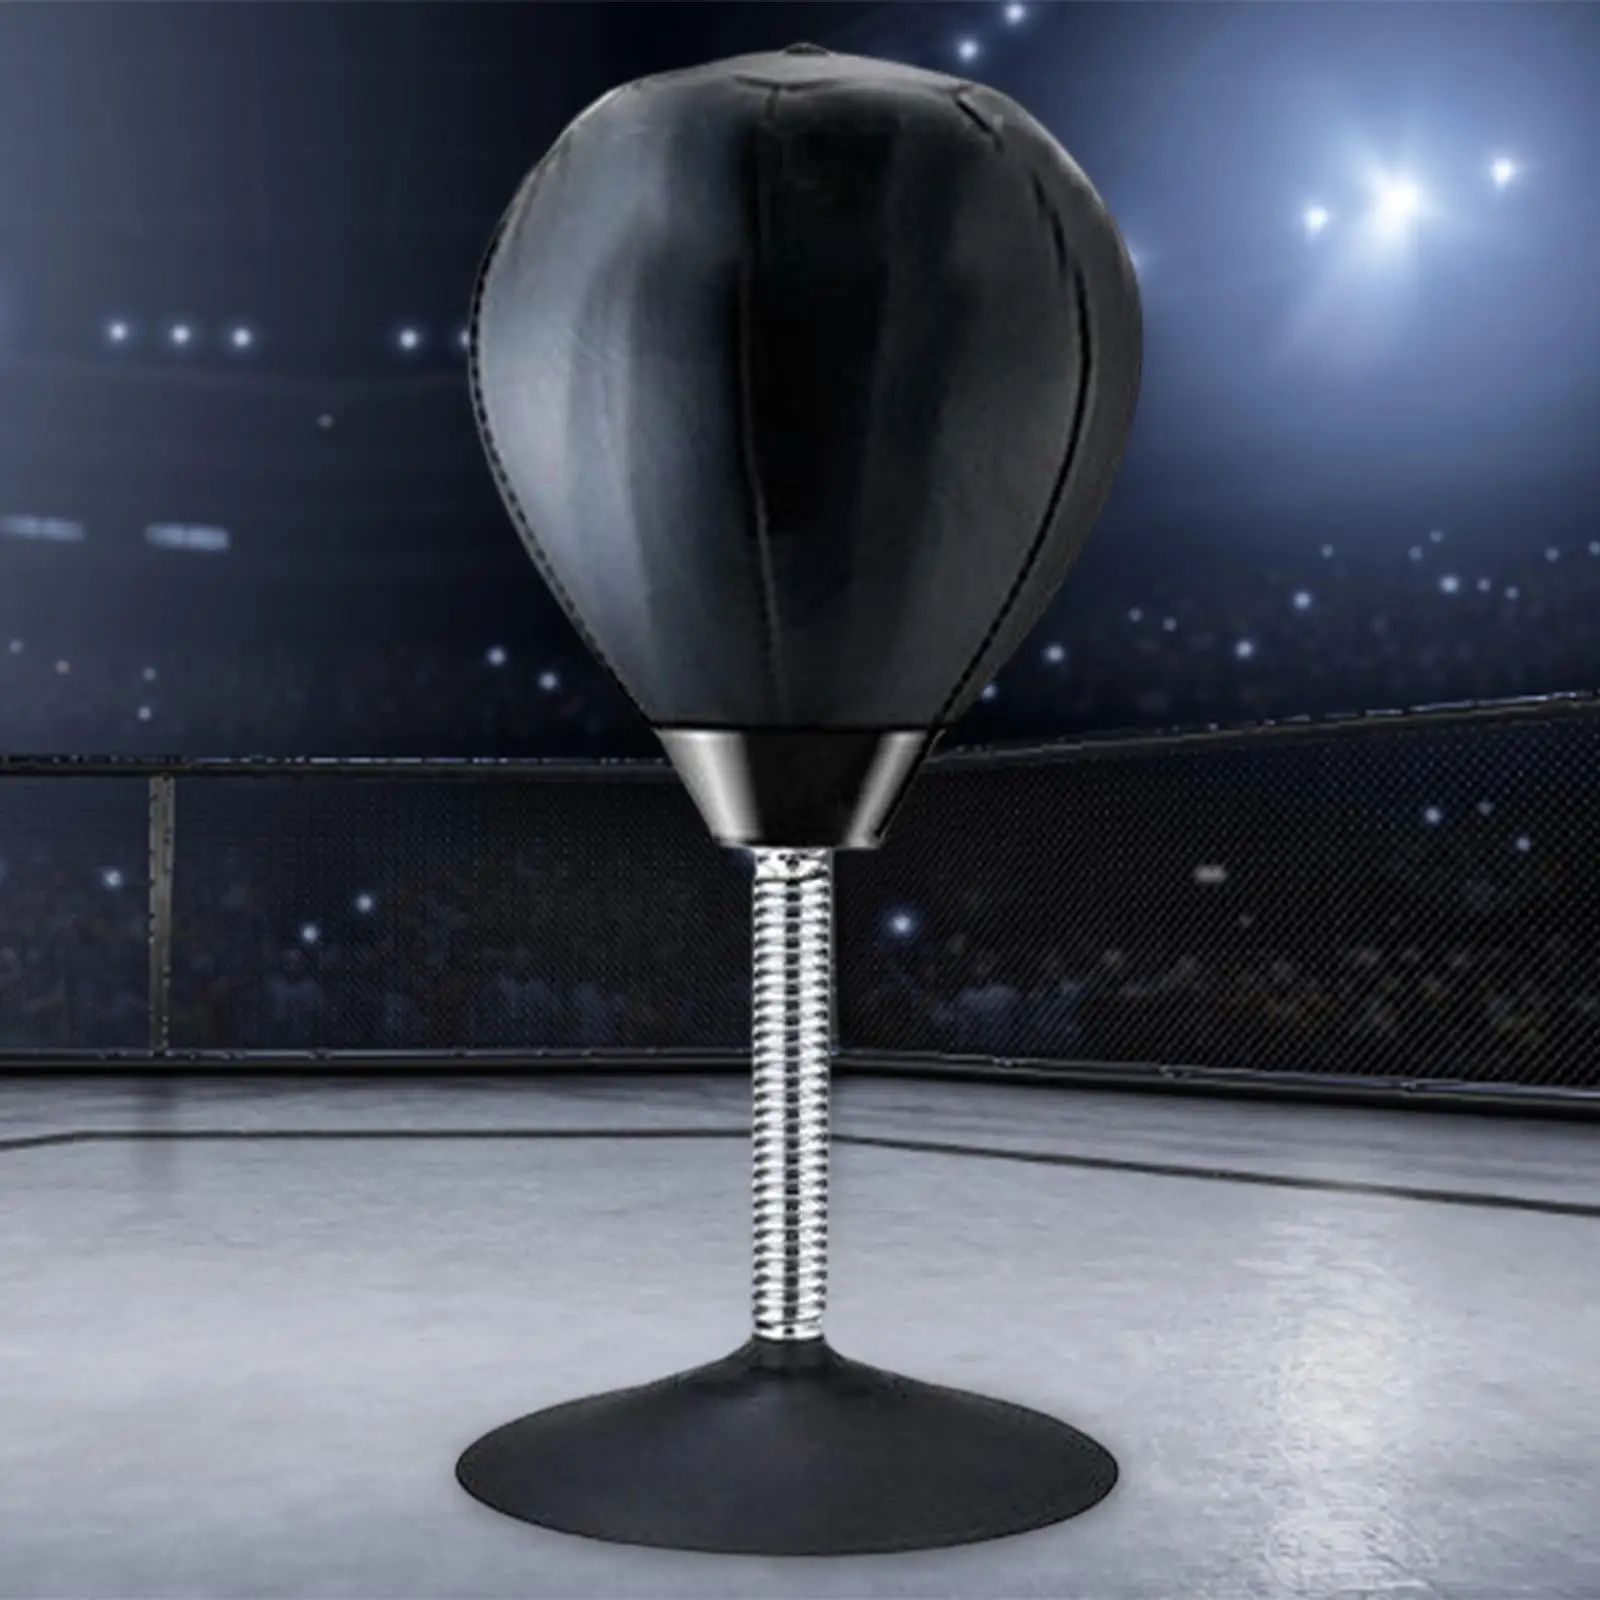 Training Hit Ball Suction Cup Strain and Tension Toys Table Desktop Punch Bag Boxing Ball for Adults Office Coworkers Training